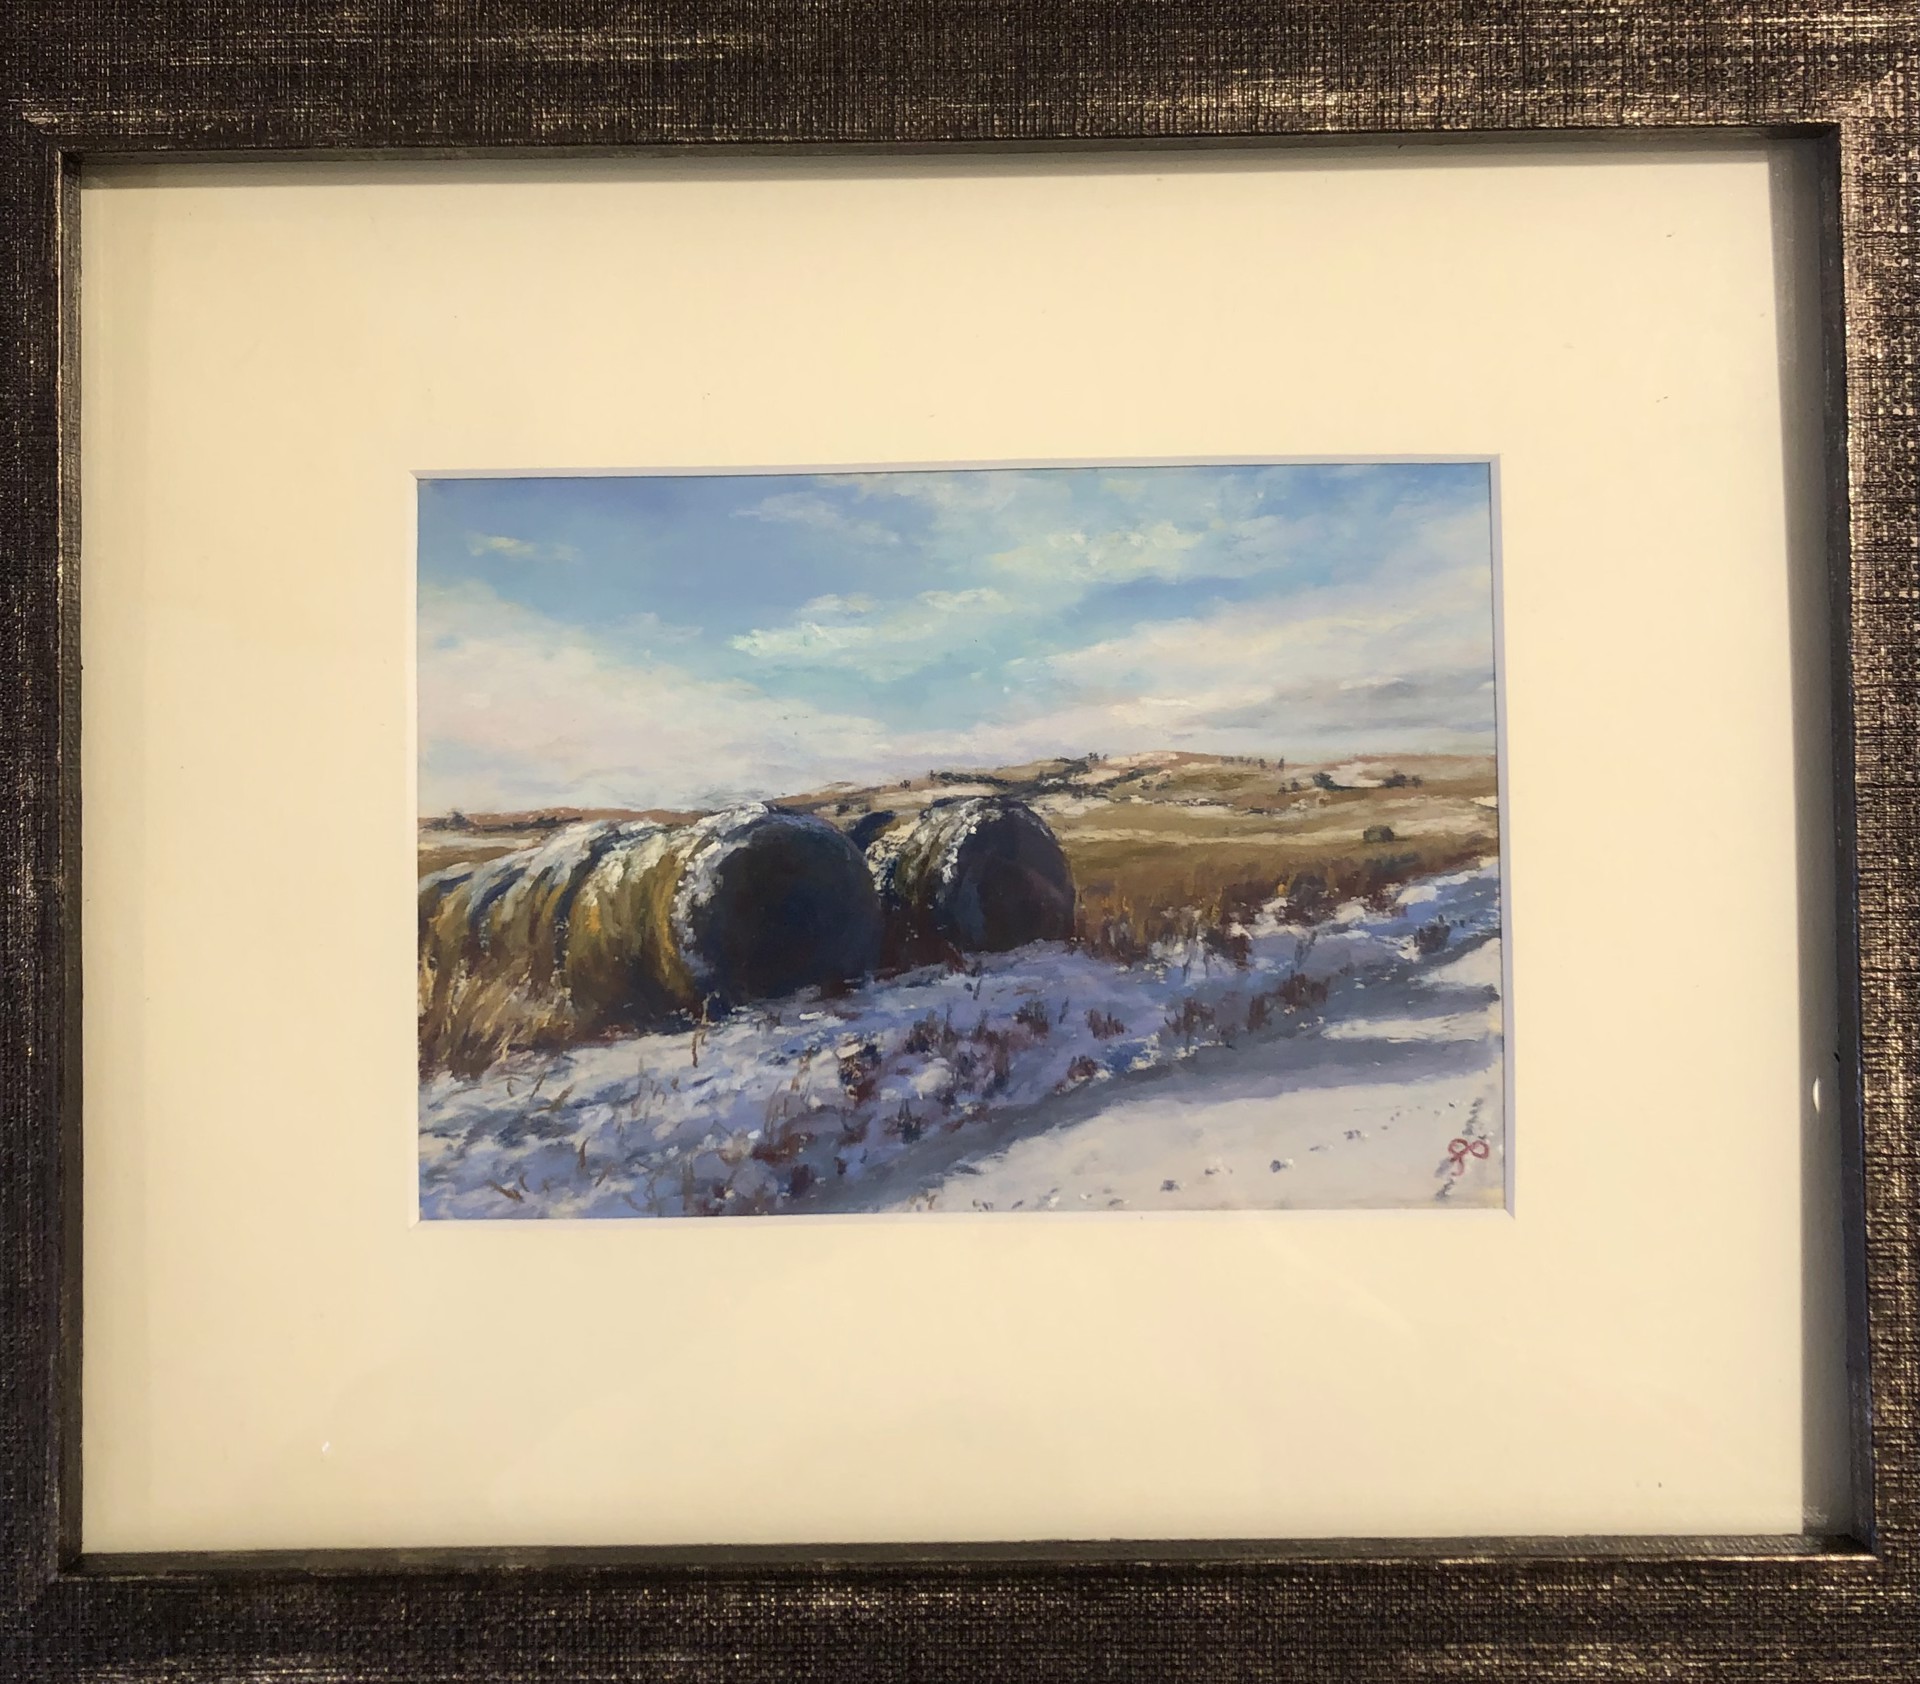 December Hay Bales and Hills by Fannie Olsen